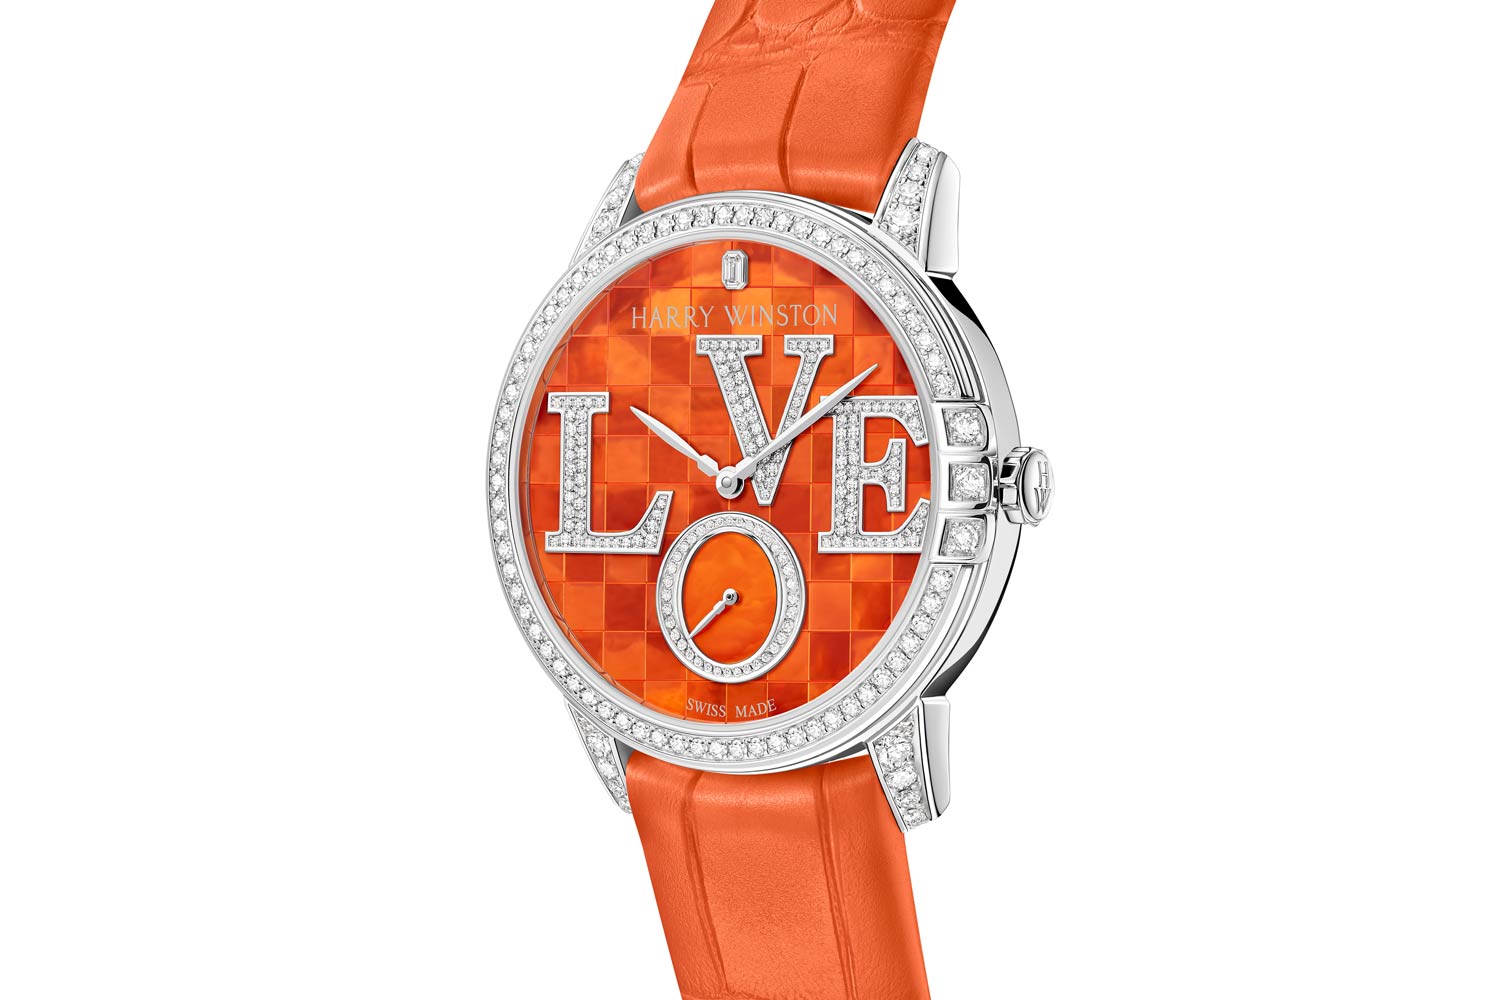 Utilizing Harry Winston’s distinct Midnight watch design, this line of timepieces has been reimagined in 18-karat white gold and mother-of-pearl dials adorned with “L.O.V.E” lettering.